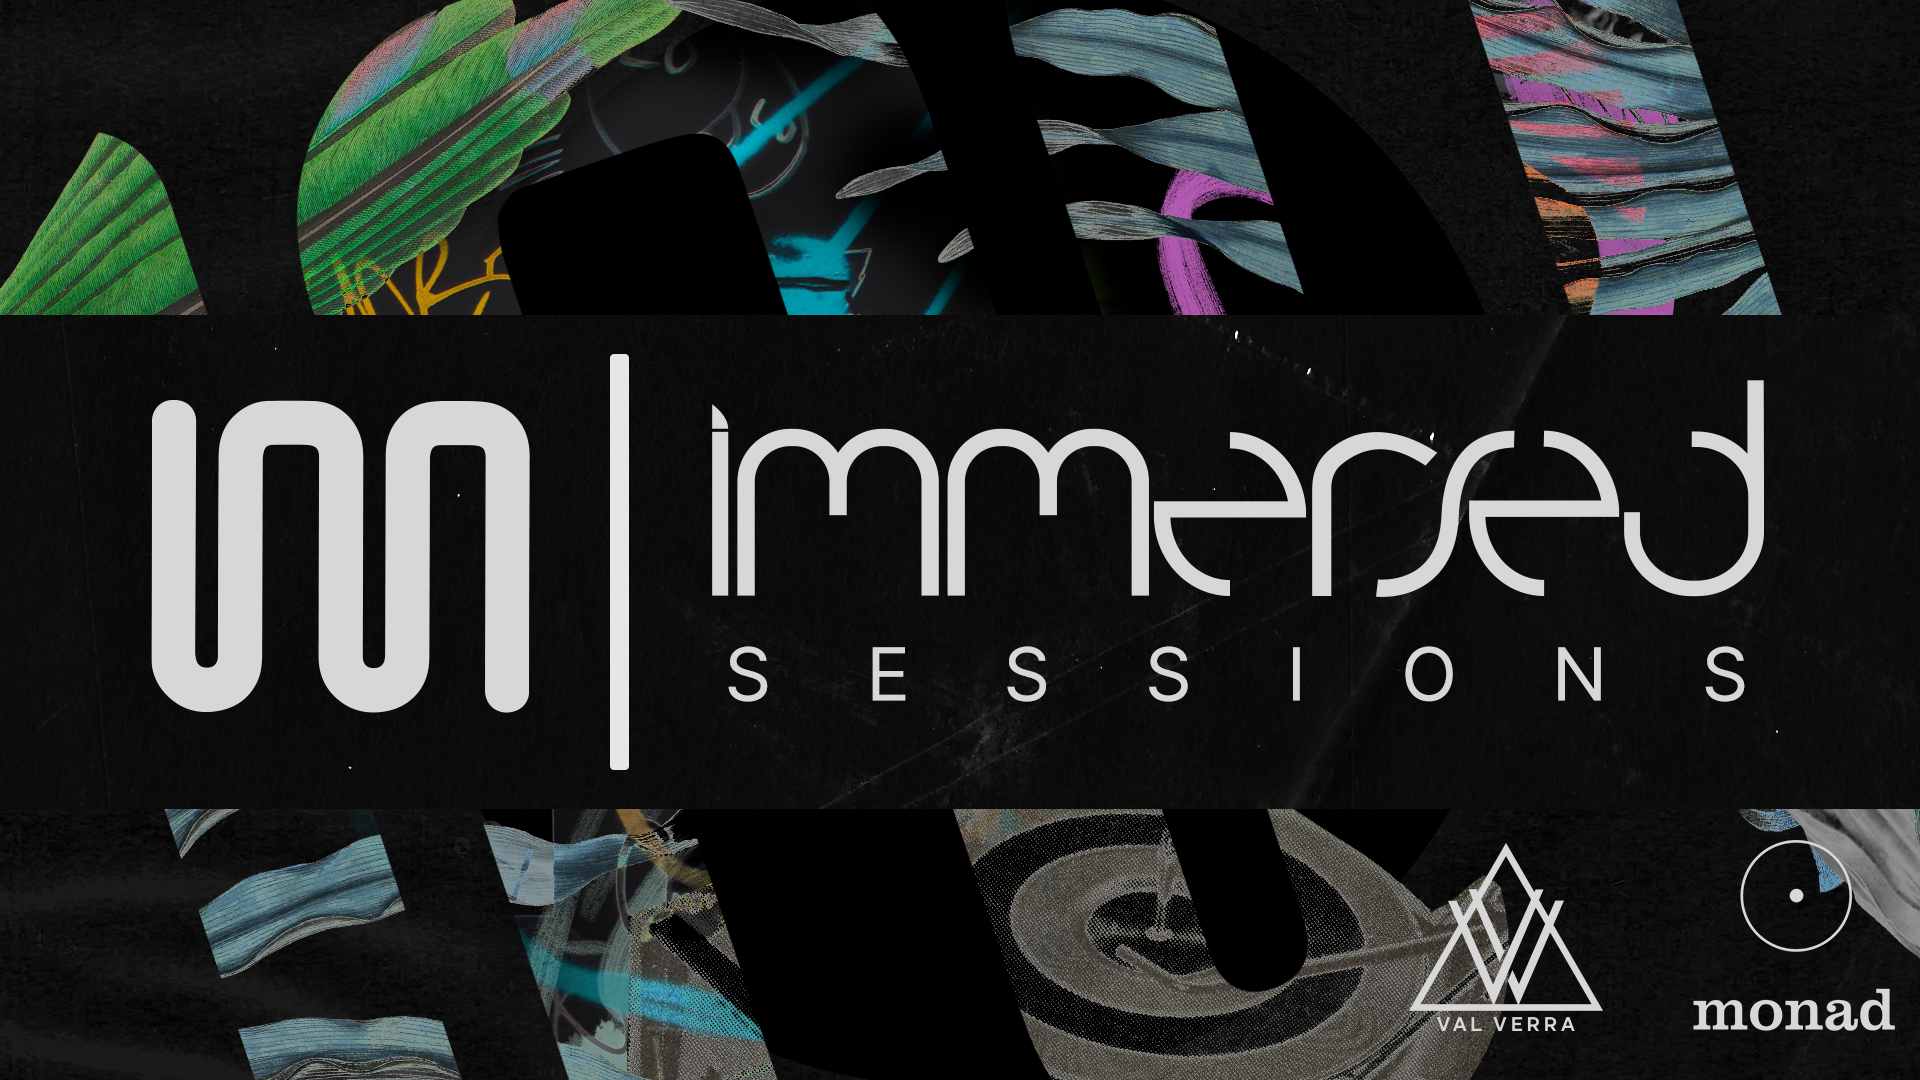 IMMERSED MUSIC SESSIONS WITH VAL VERRA